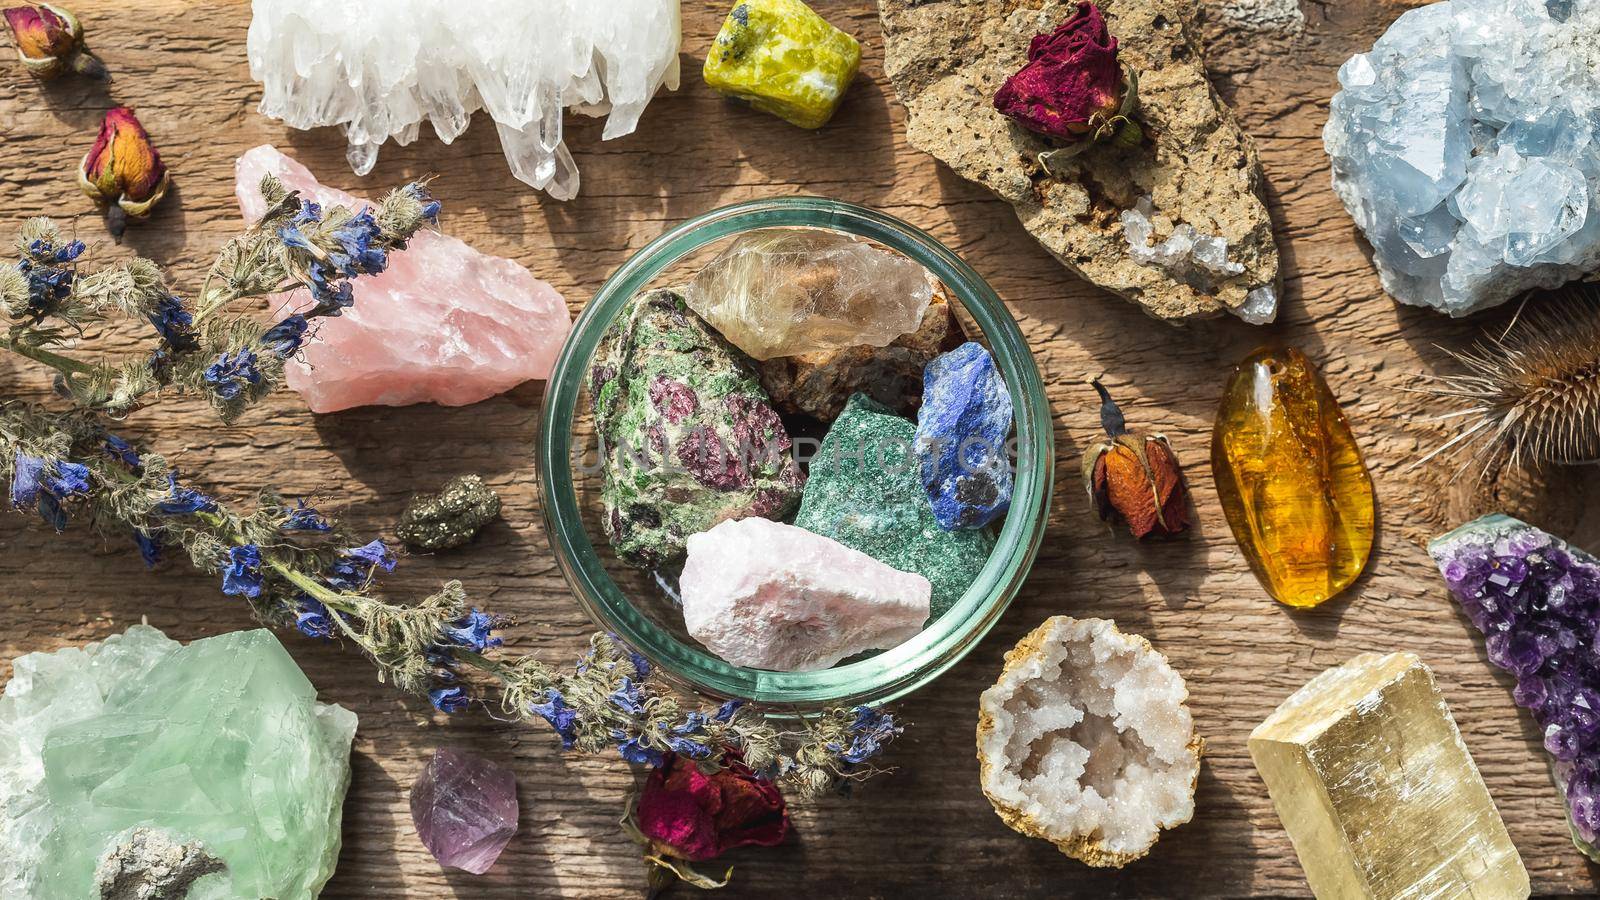 Colorful healing crystals and minerals set up by Syvanych